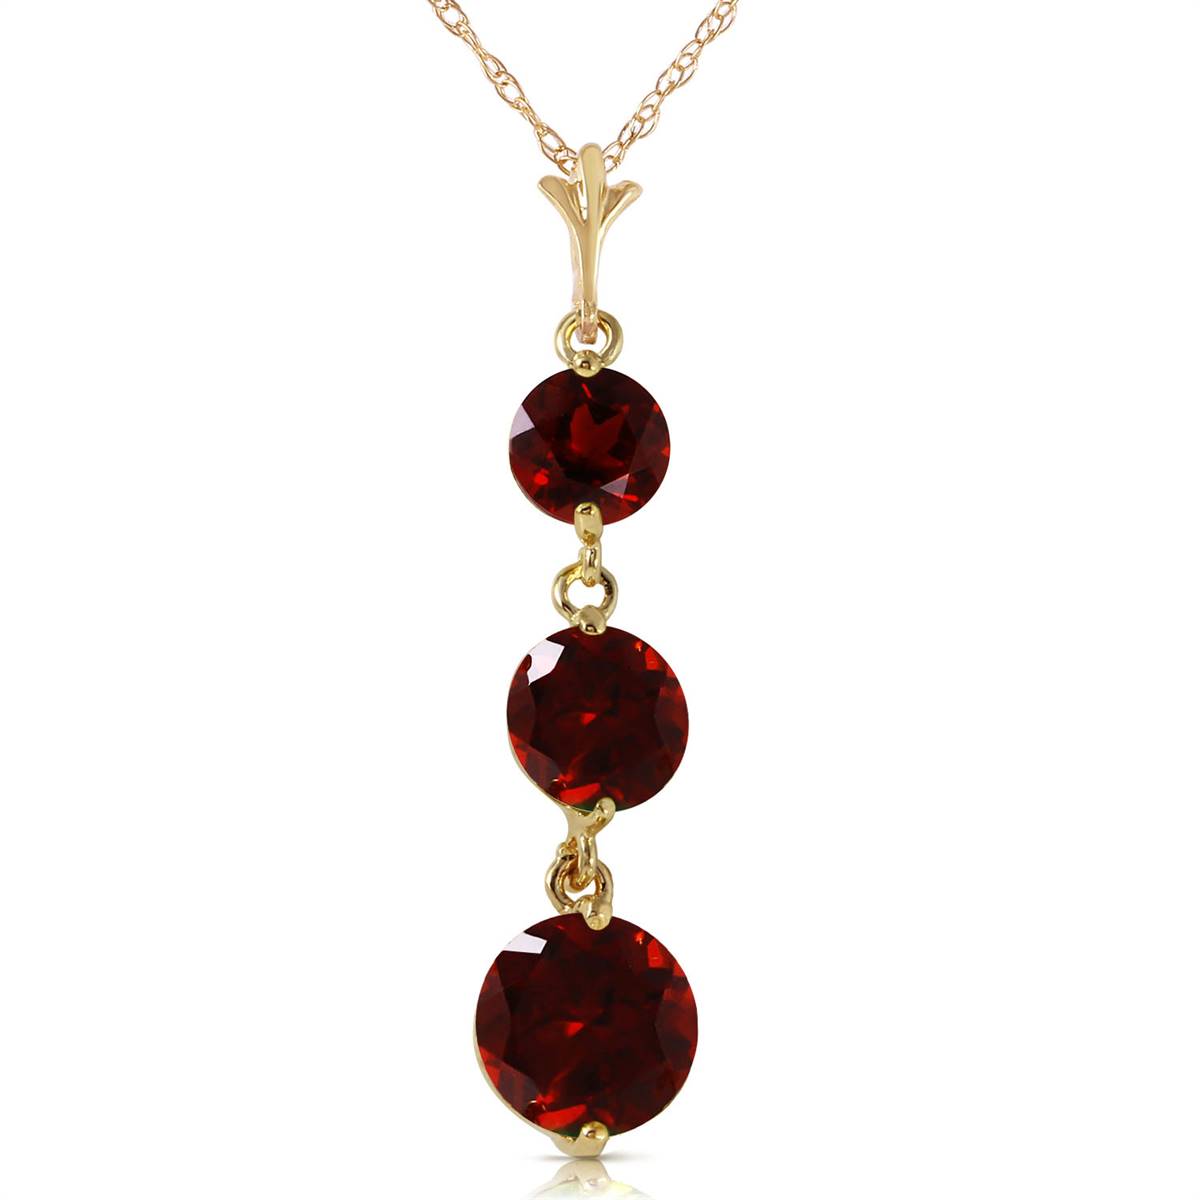 3.6 Carat 14K Solid Yellow Gold Eyes Of Happiness Garnet Necklace